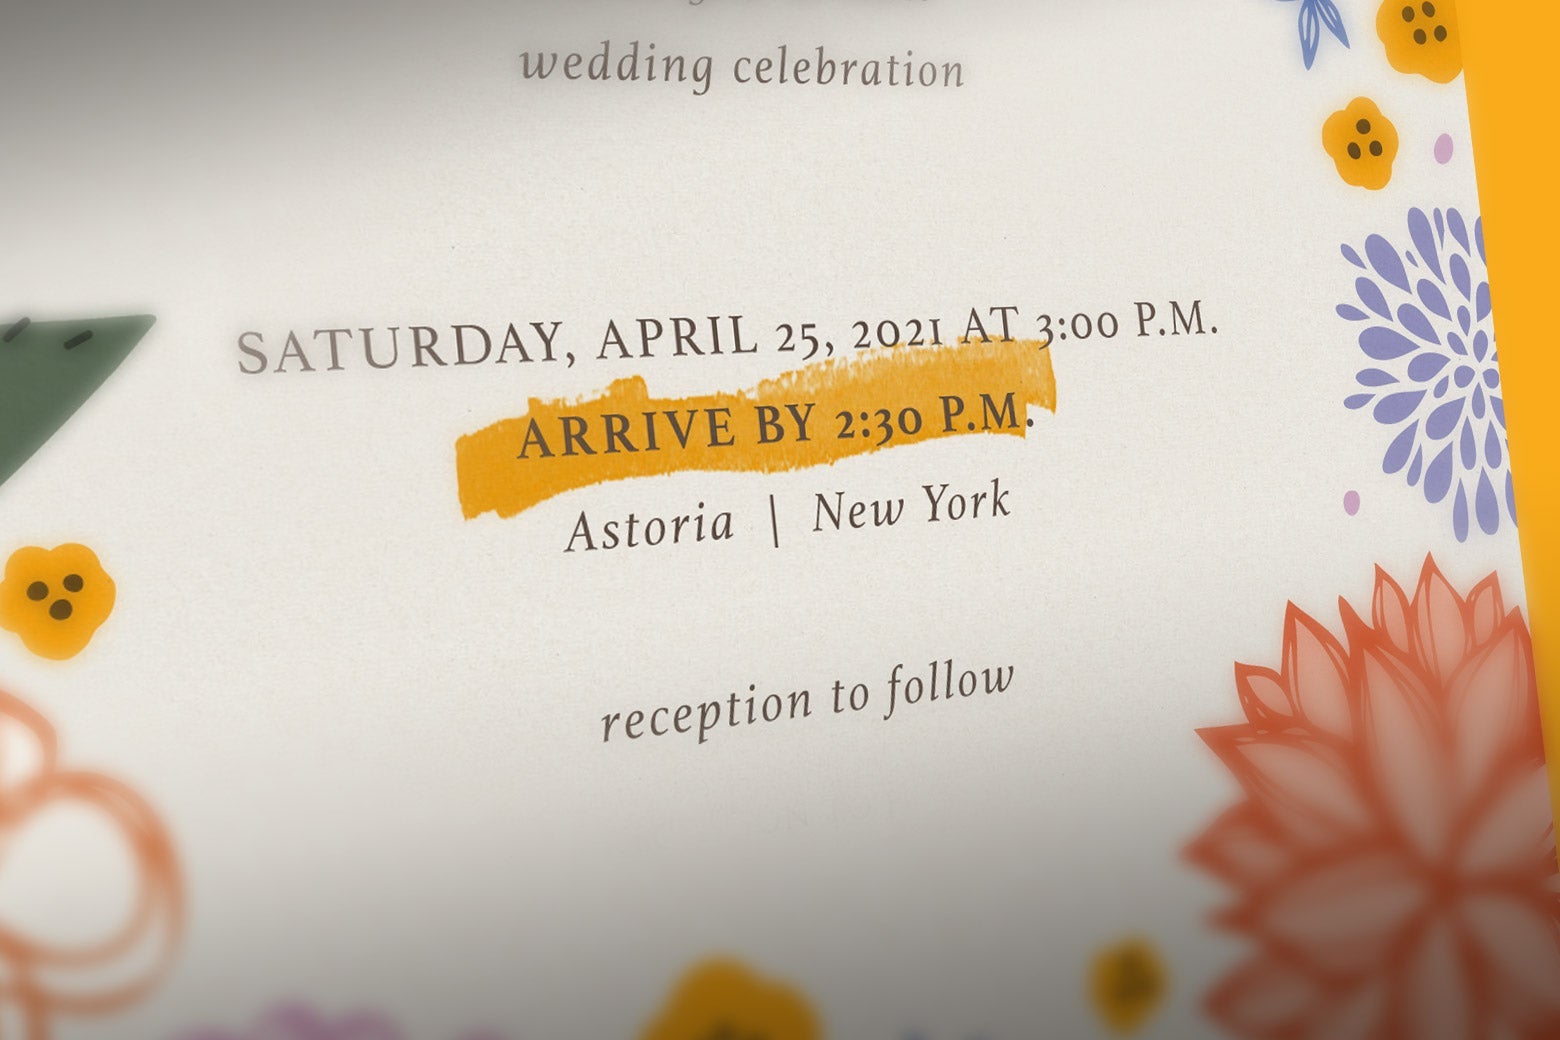 A wedding invitation with an arrive-by time highlighted